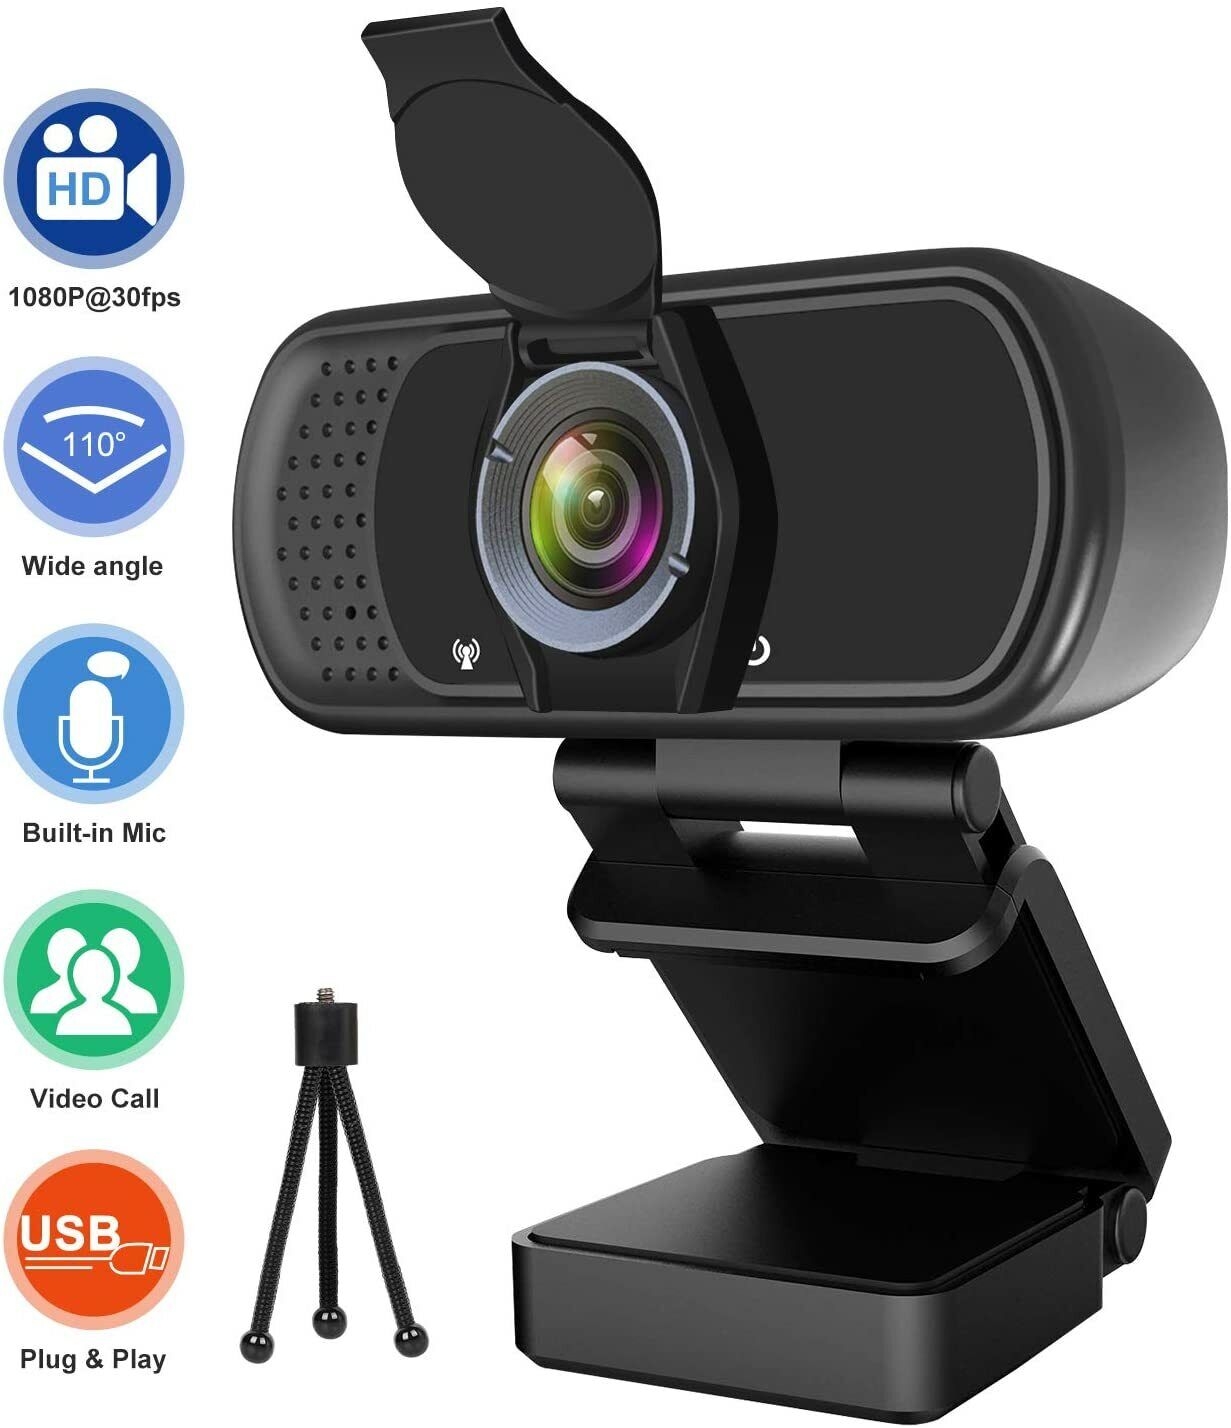 1080P HD Webcam with Microphone/Privacy Cover/Tripod-30FPS Streaming, 110° Angle